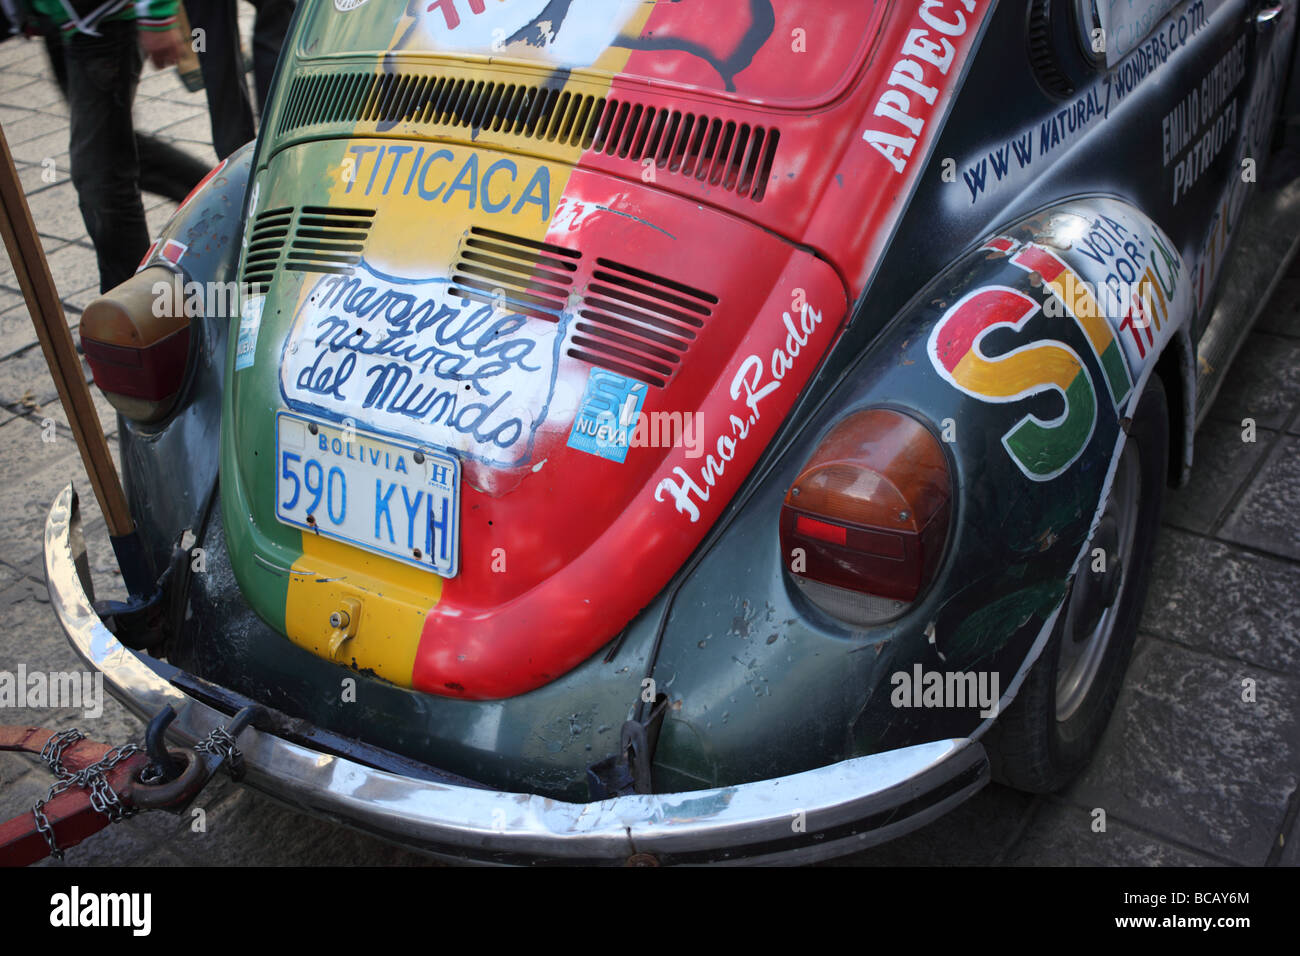 Volkswagen Beetle painted in national colours as campaign to promote Lake Titicaca as one of The Seven Natural Wonders of the World, La Paz, Bolivia Stock Photo